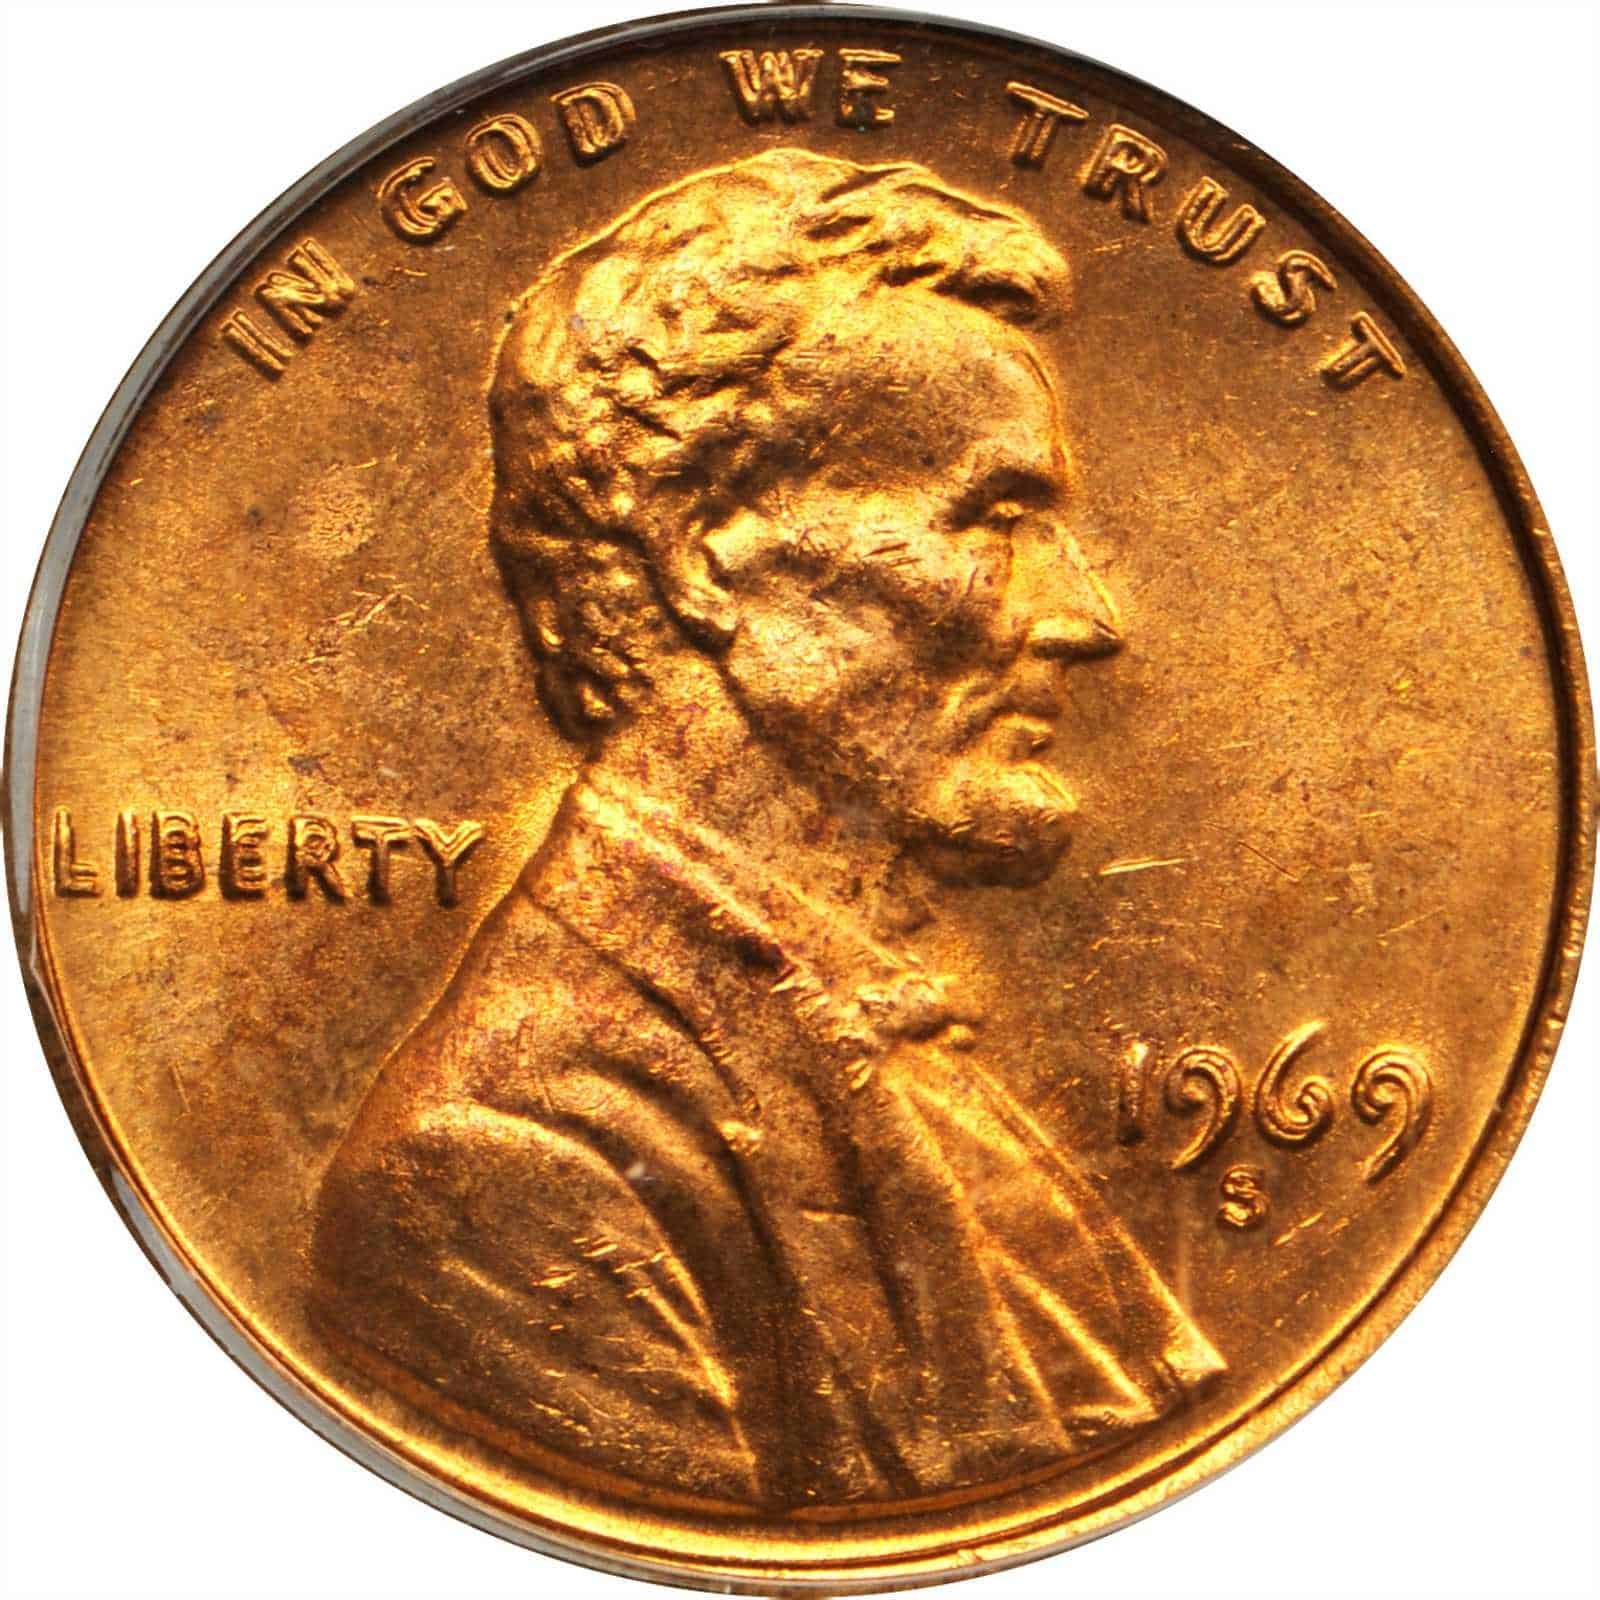 The Obverse of the 1969 Penny